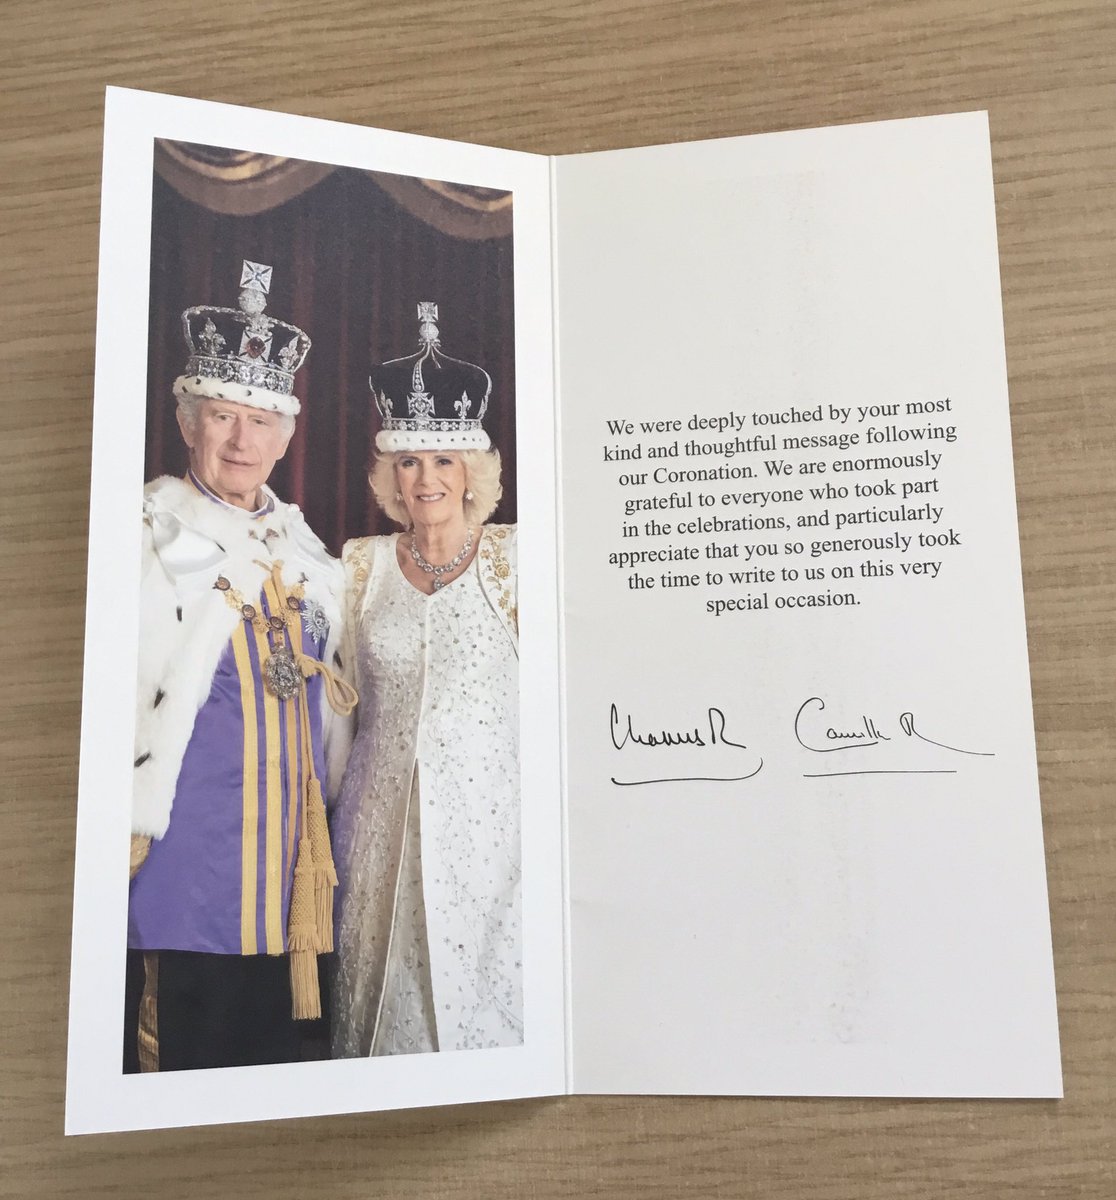 This morning the postman delivered a very special letter to Nursery! The children were all very excited to hear what King Charles and Queen Camilla had written!! We are so pleased that Their Royal Highnesses loved the card that we made for them for their coronation!